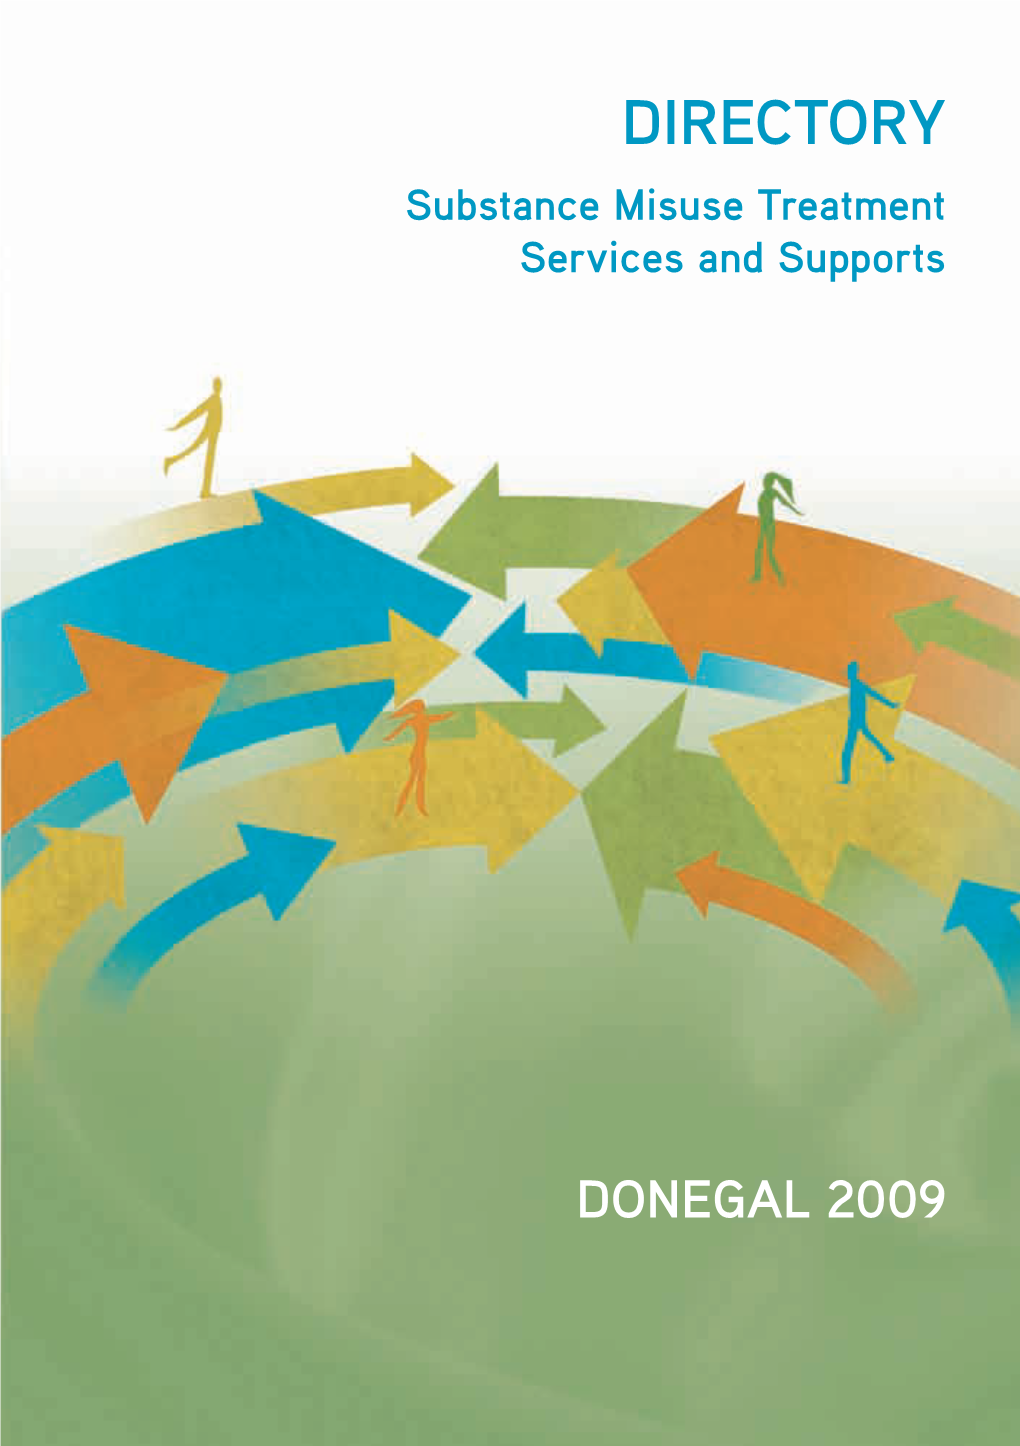 Donegal Treatment Directory 2009